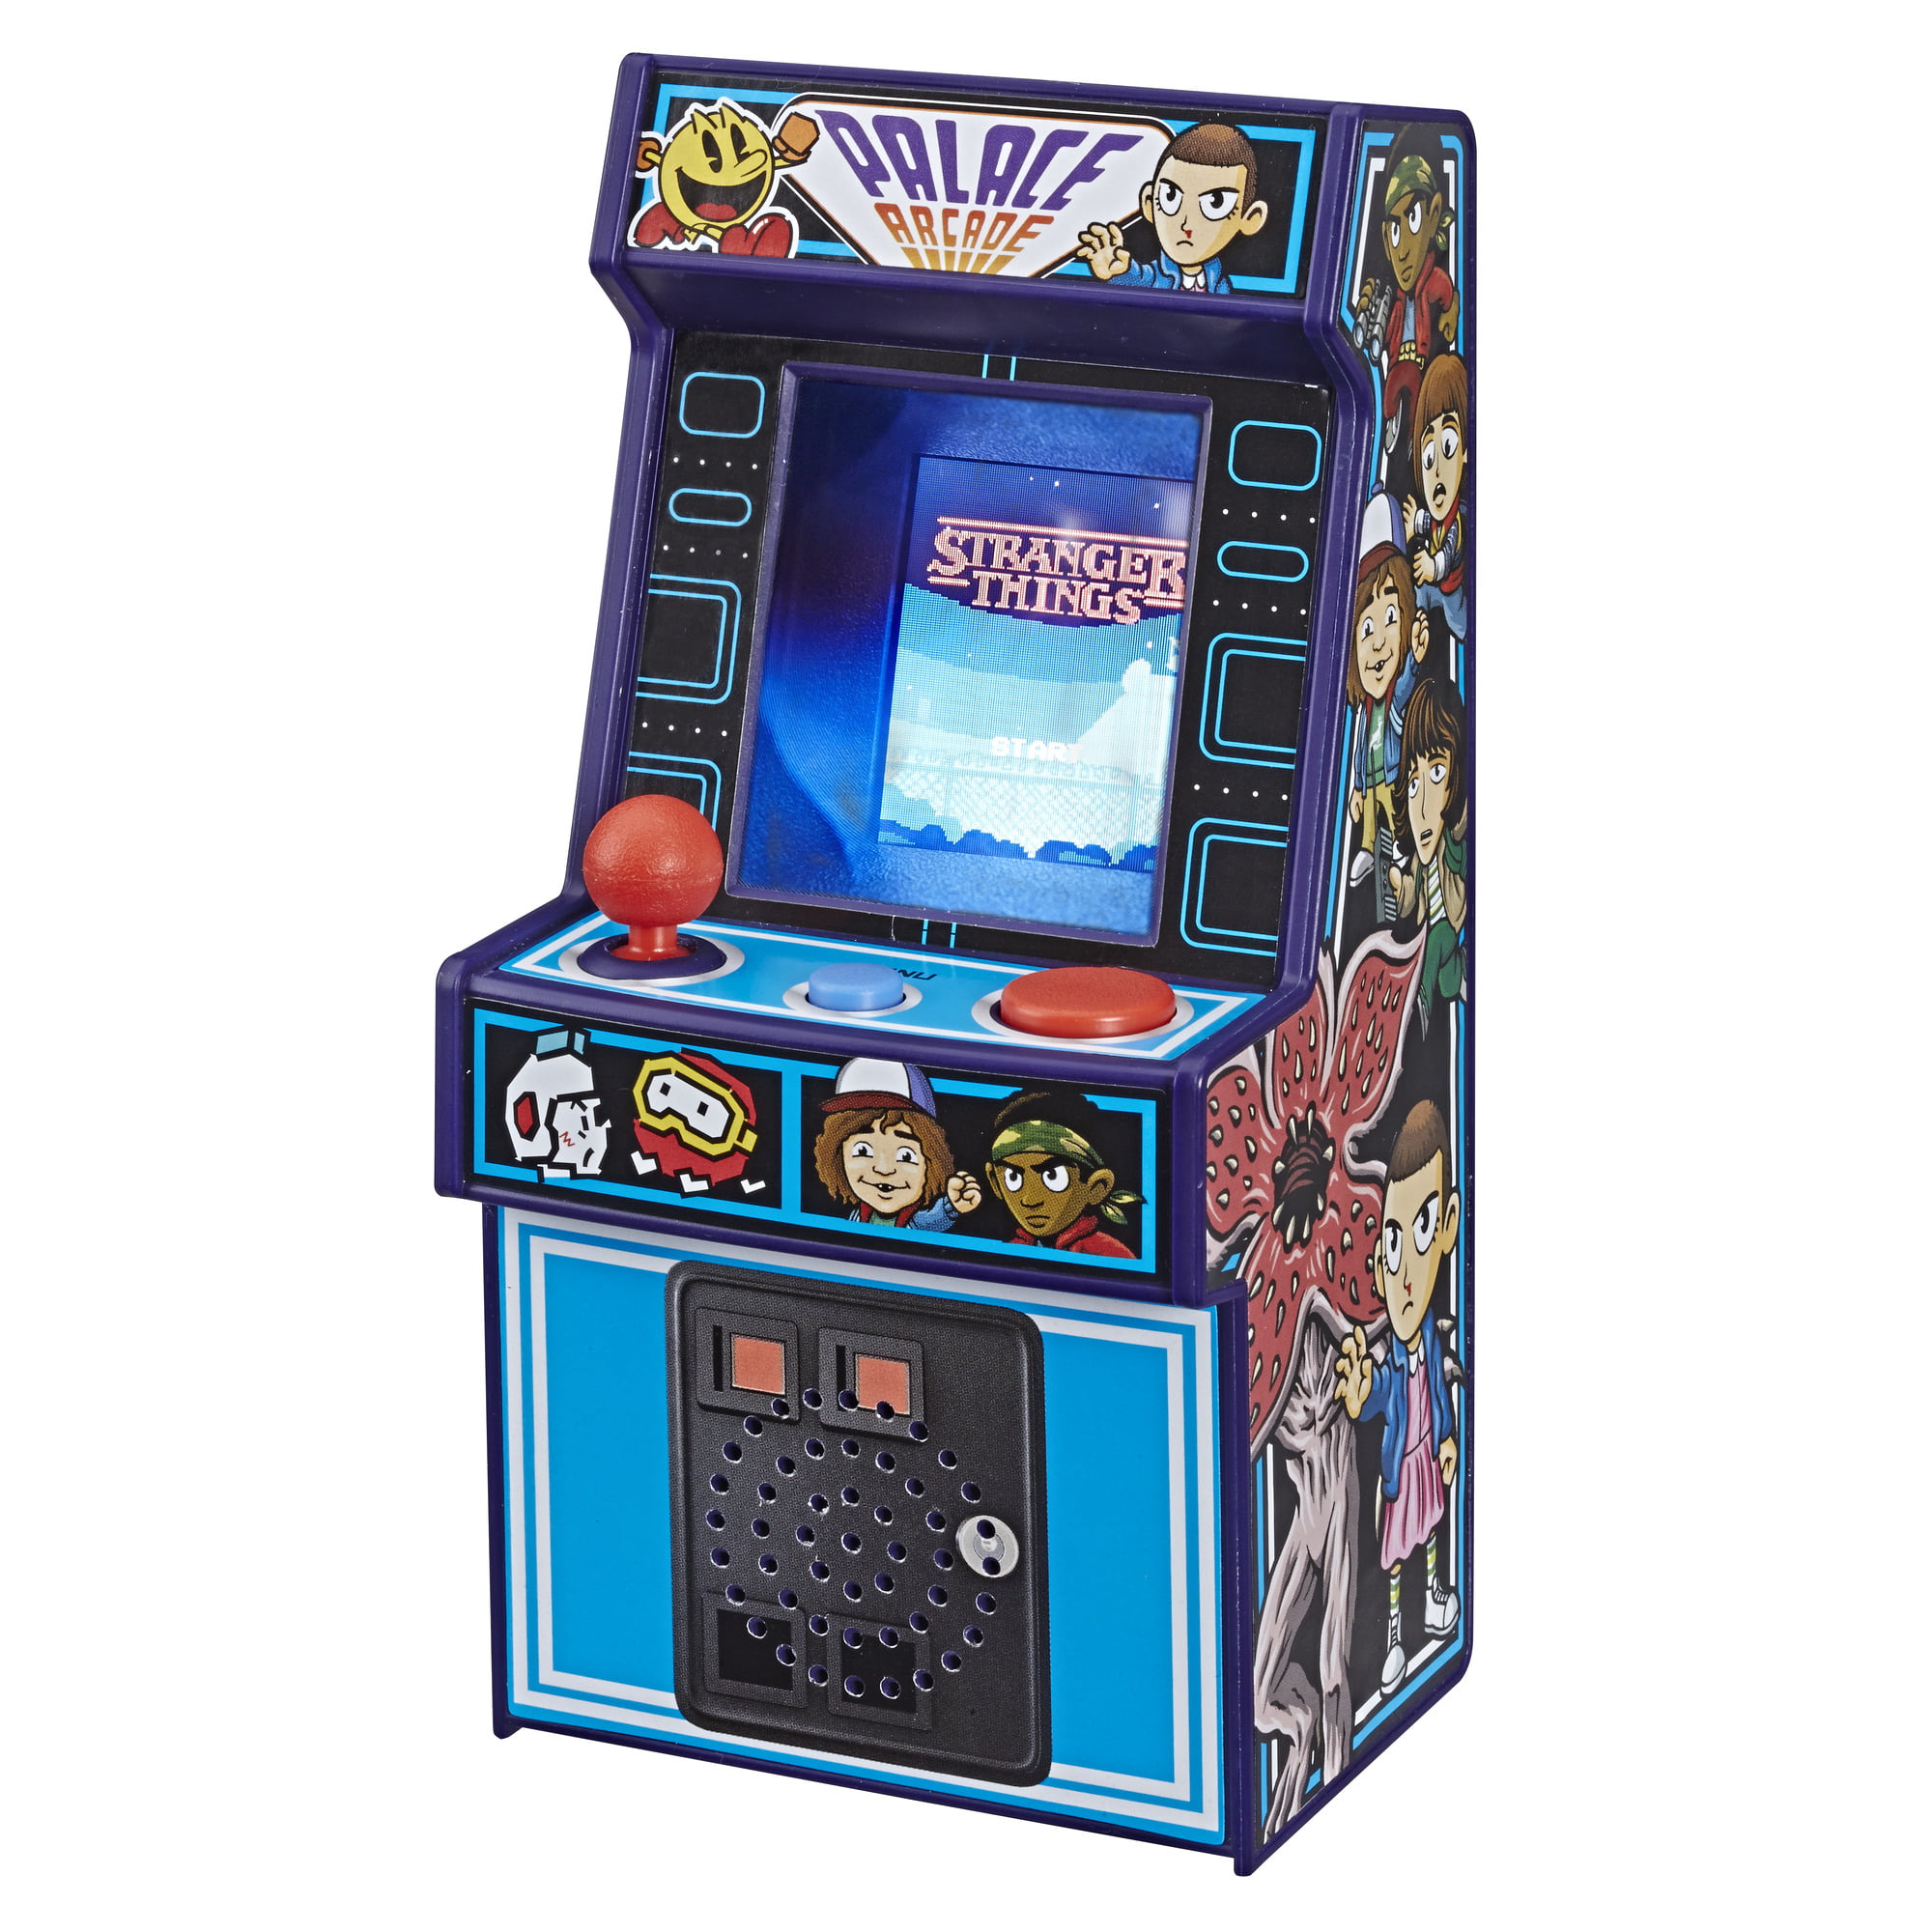 Multicoloured Hasbro Stranger Things Palace Arcade Handheld Electronic Game for sale online E5640 